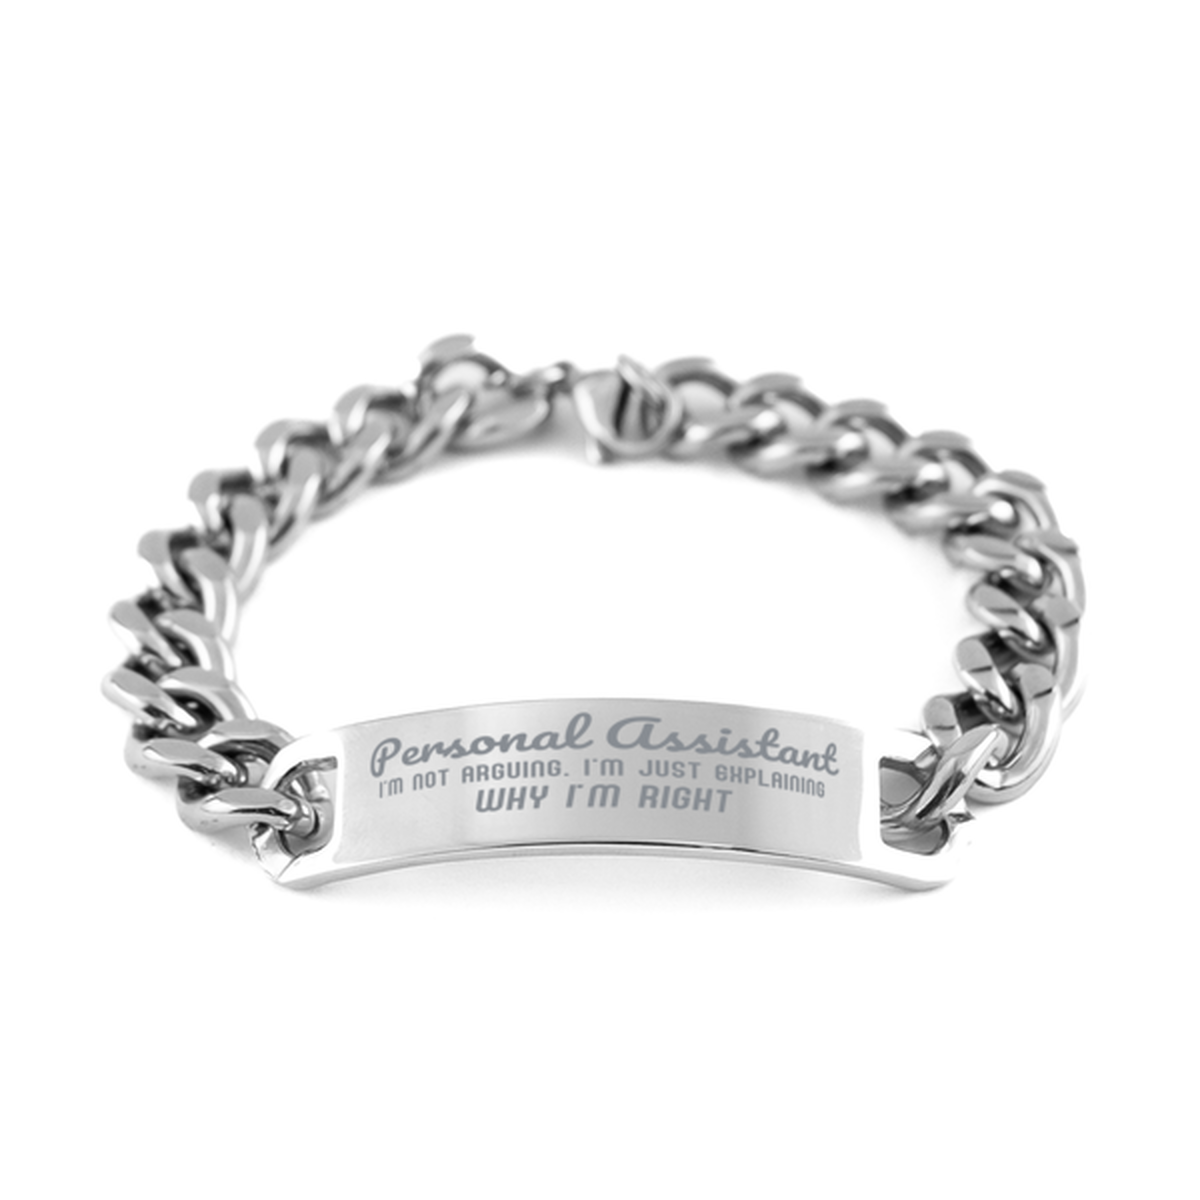 Personal Assistant I'm not Arguing. I'm Just Explaining Why I'm RIGHT Cuban Chain Stainless Steel Bracelet, Graduation Birthday Christmas Personal Assistant Gifts For Personal Assistant Funny Saying Quote Present for Men Women Coworker